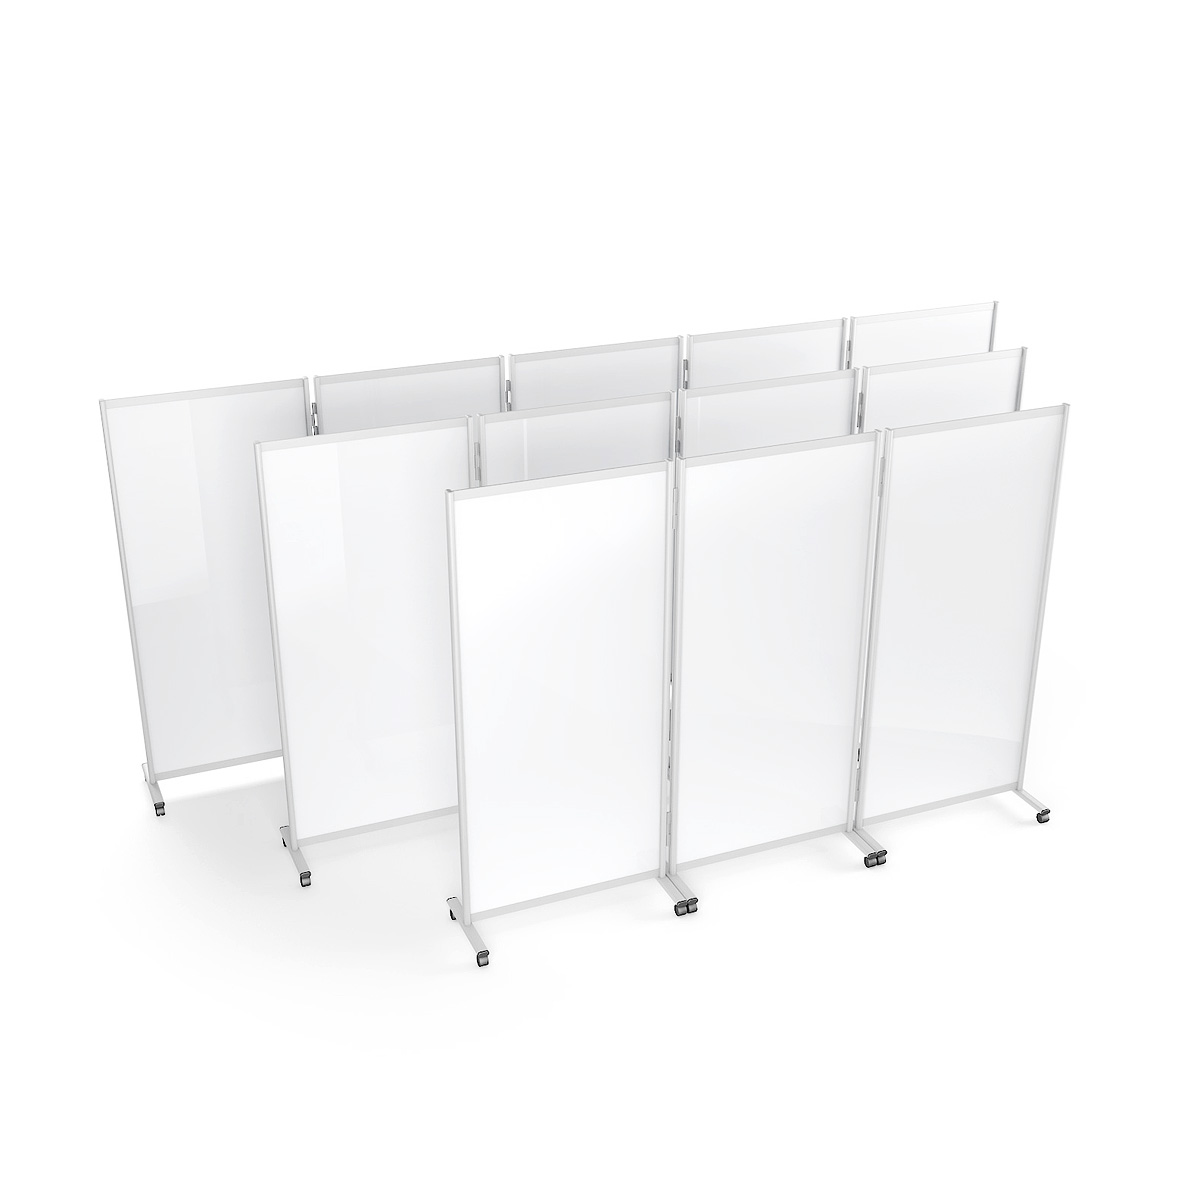 Privacy Room Divider Screens on Wheels Can be Linking in a Straight Line or Is a Concertina Shape Using the Linking Kit That is Supplied With Each Screen